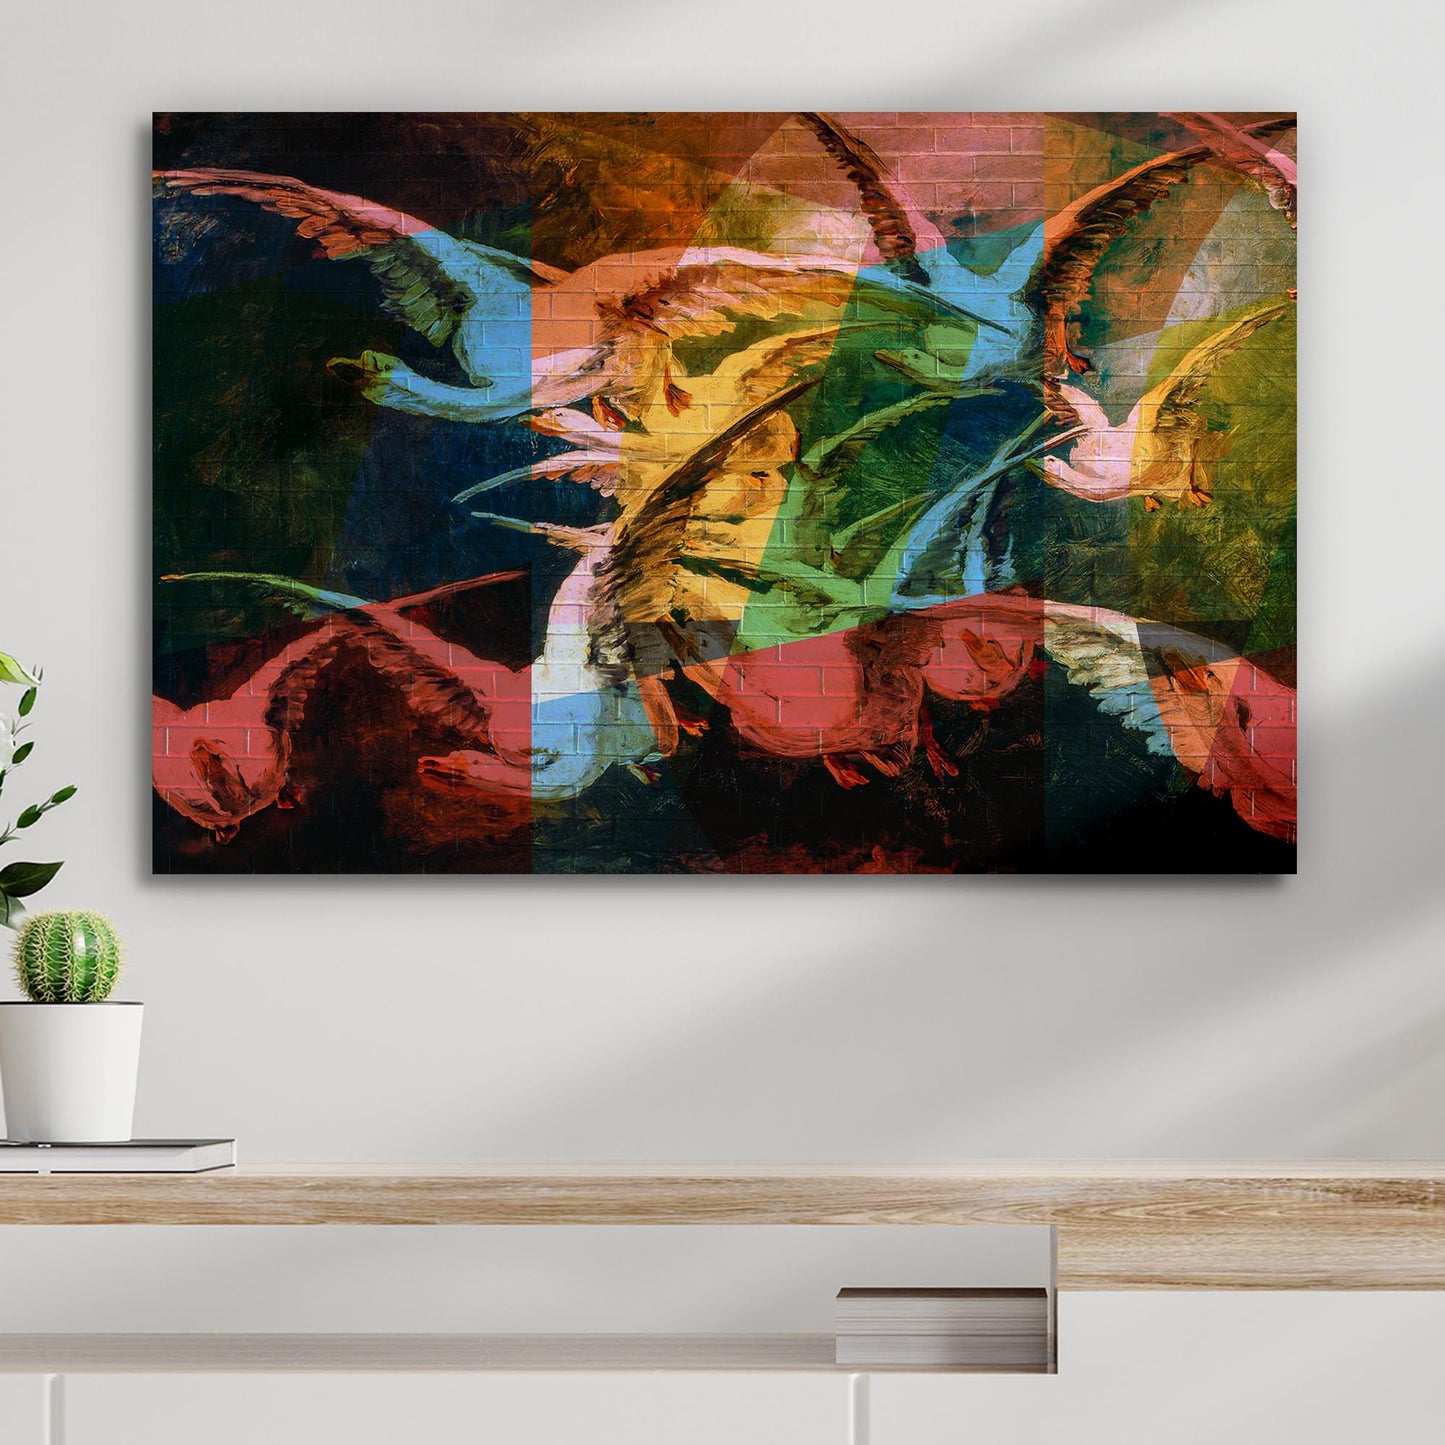 Geese Abstract Canvas Wall Art - Image by Tailored Canvases